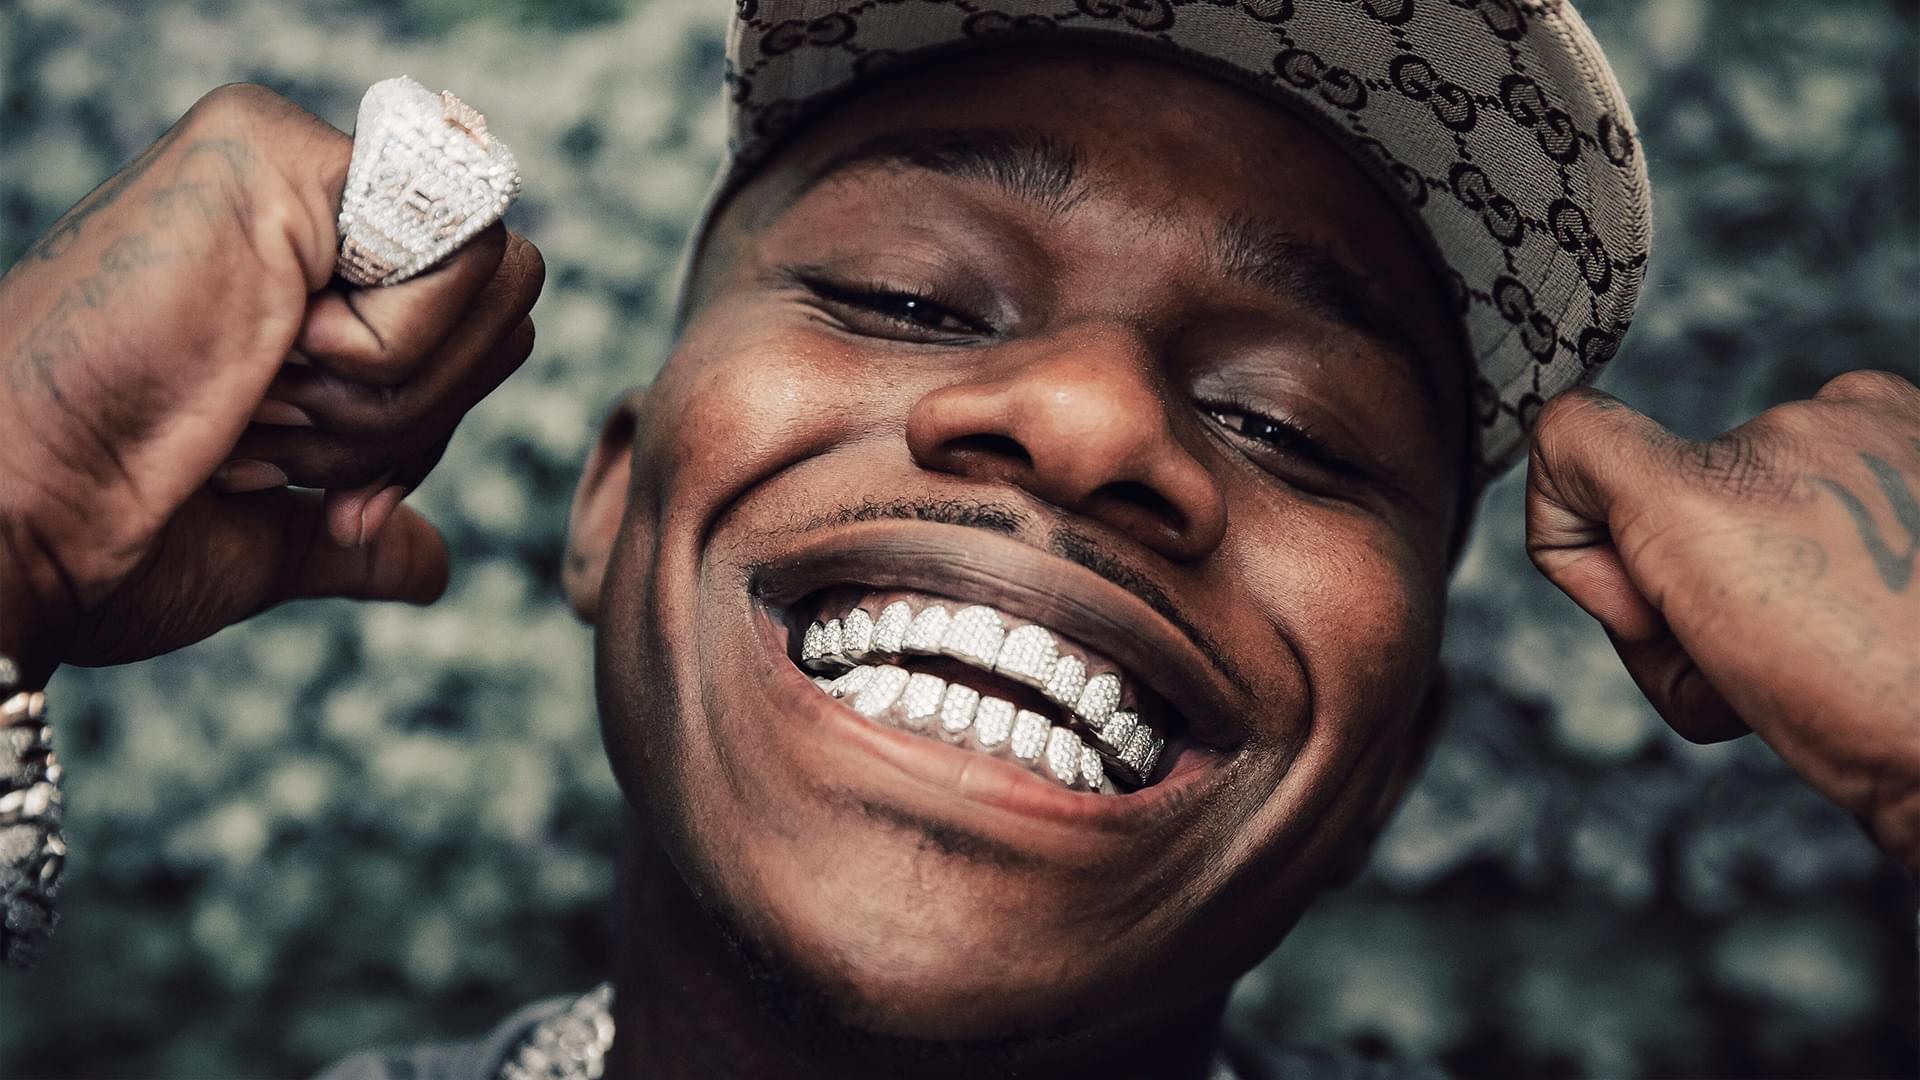 DaBaby Earns A Cosign On His Comedic Music Videos From A$AP Rocky